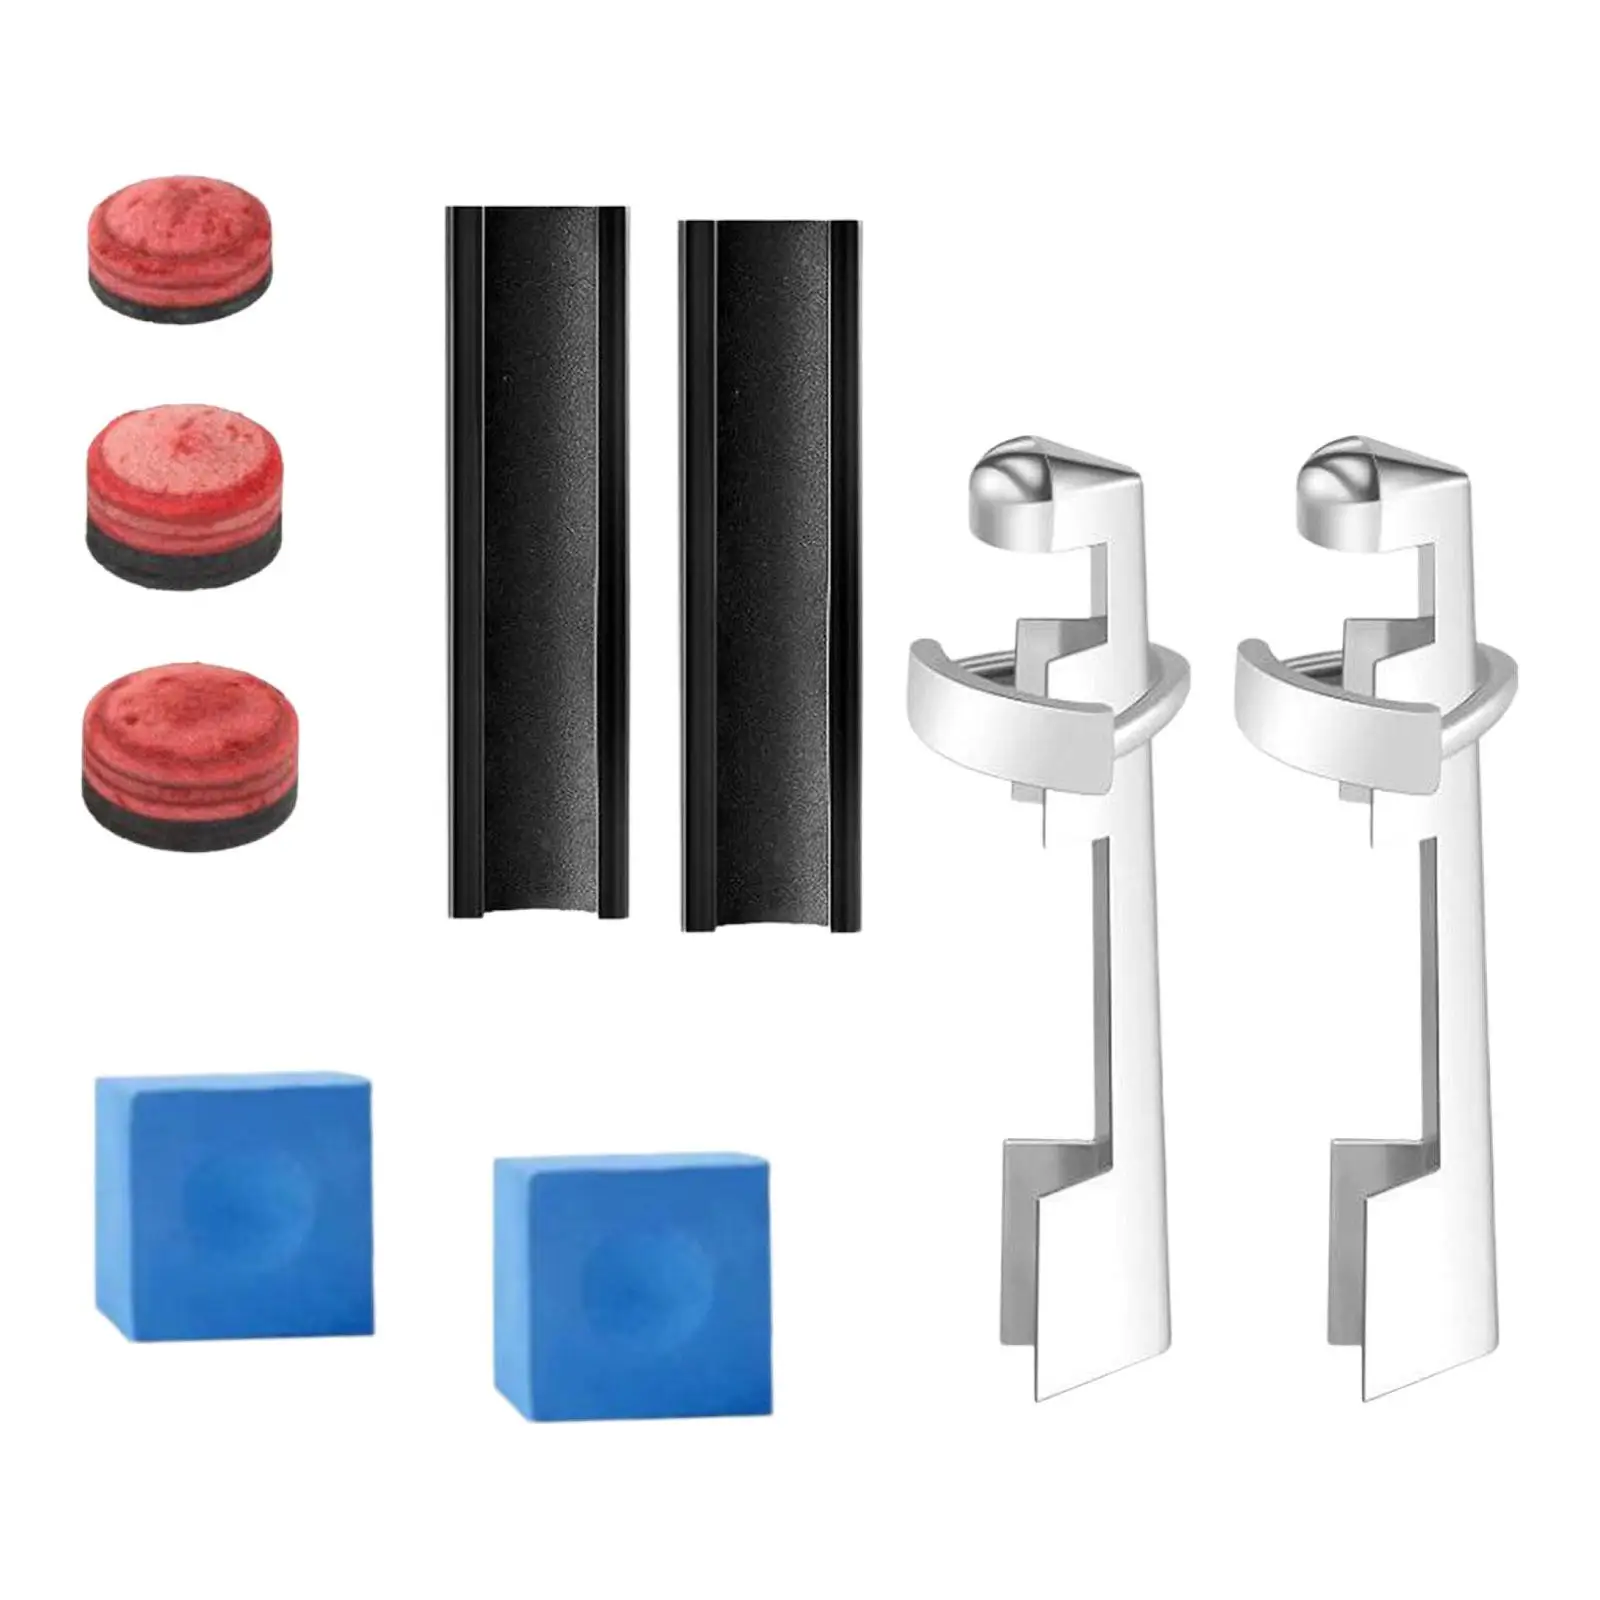 9x Billiards Cue Stick Billiards Pool Tip Trimmer Pool Cue Tip Repair Kit for Enthusiasts Billiards Playing Game Outdoor Sports